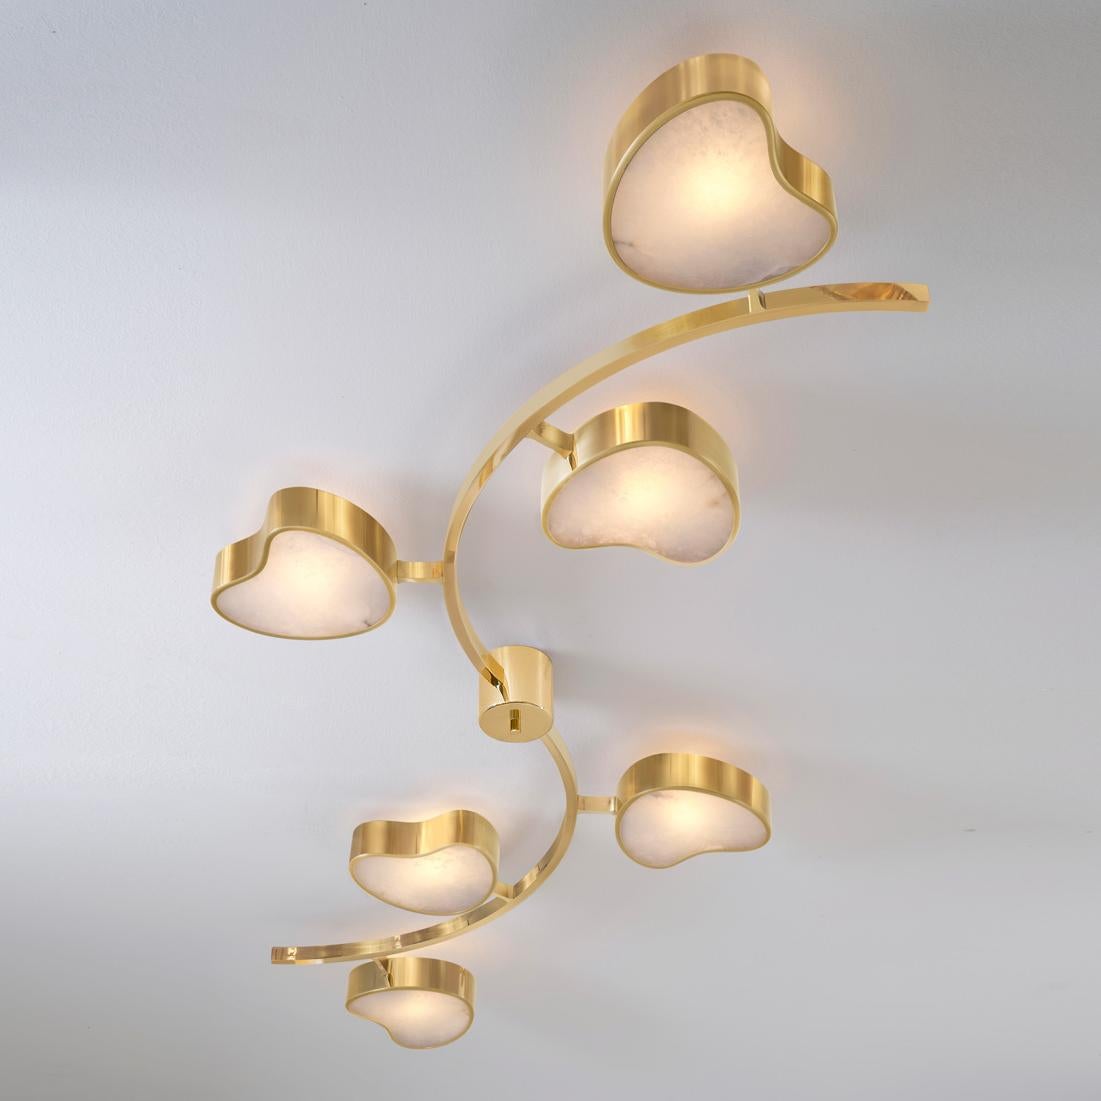 Cuore N.6 Ceiling Light by Gaspare Asaro. Satin Brass and Sand White Finish For Sale 2